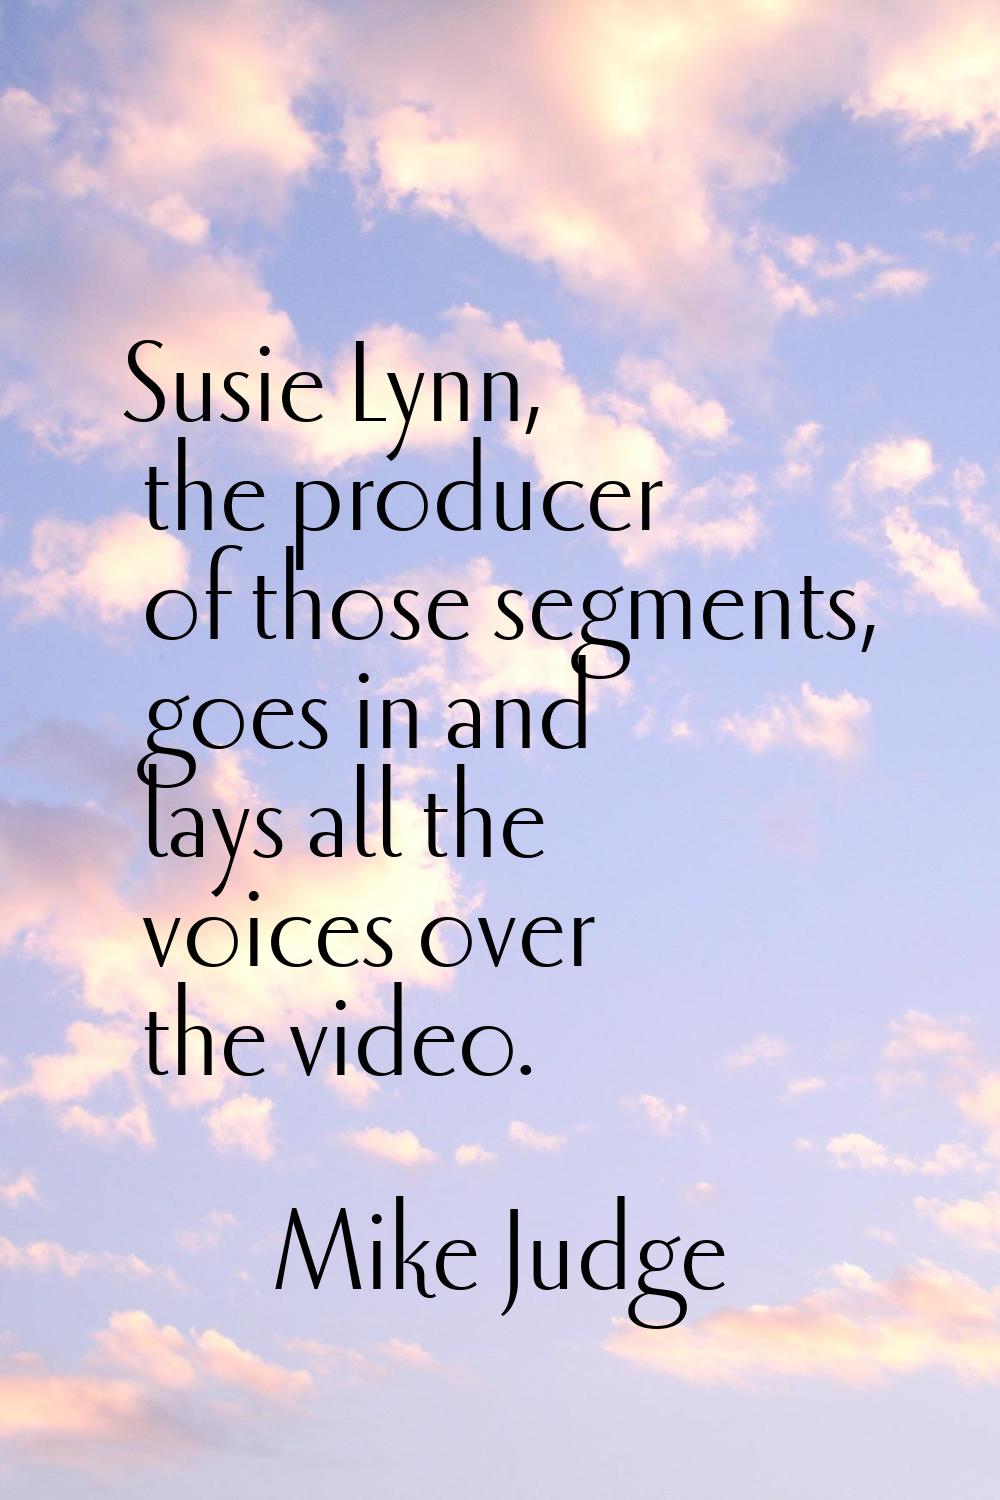 Susie Lynn, the producer of those segments, goes in and lays all the voices over the video.